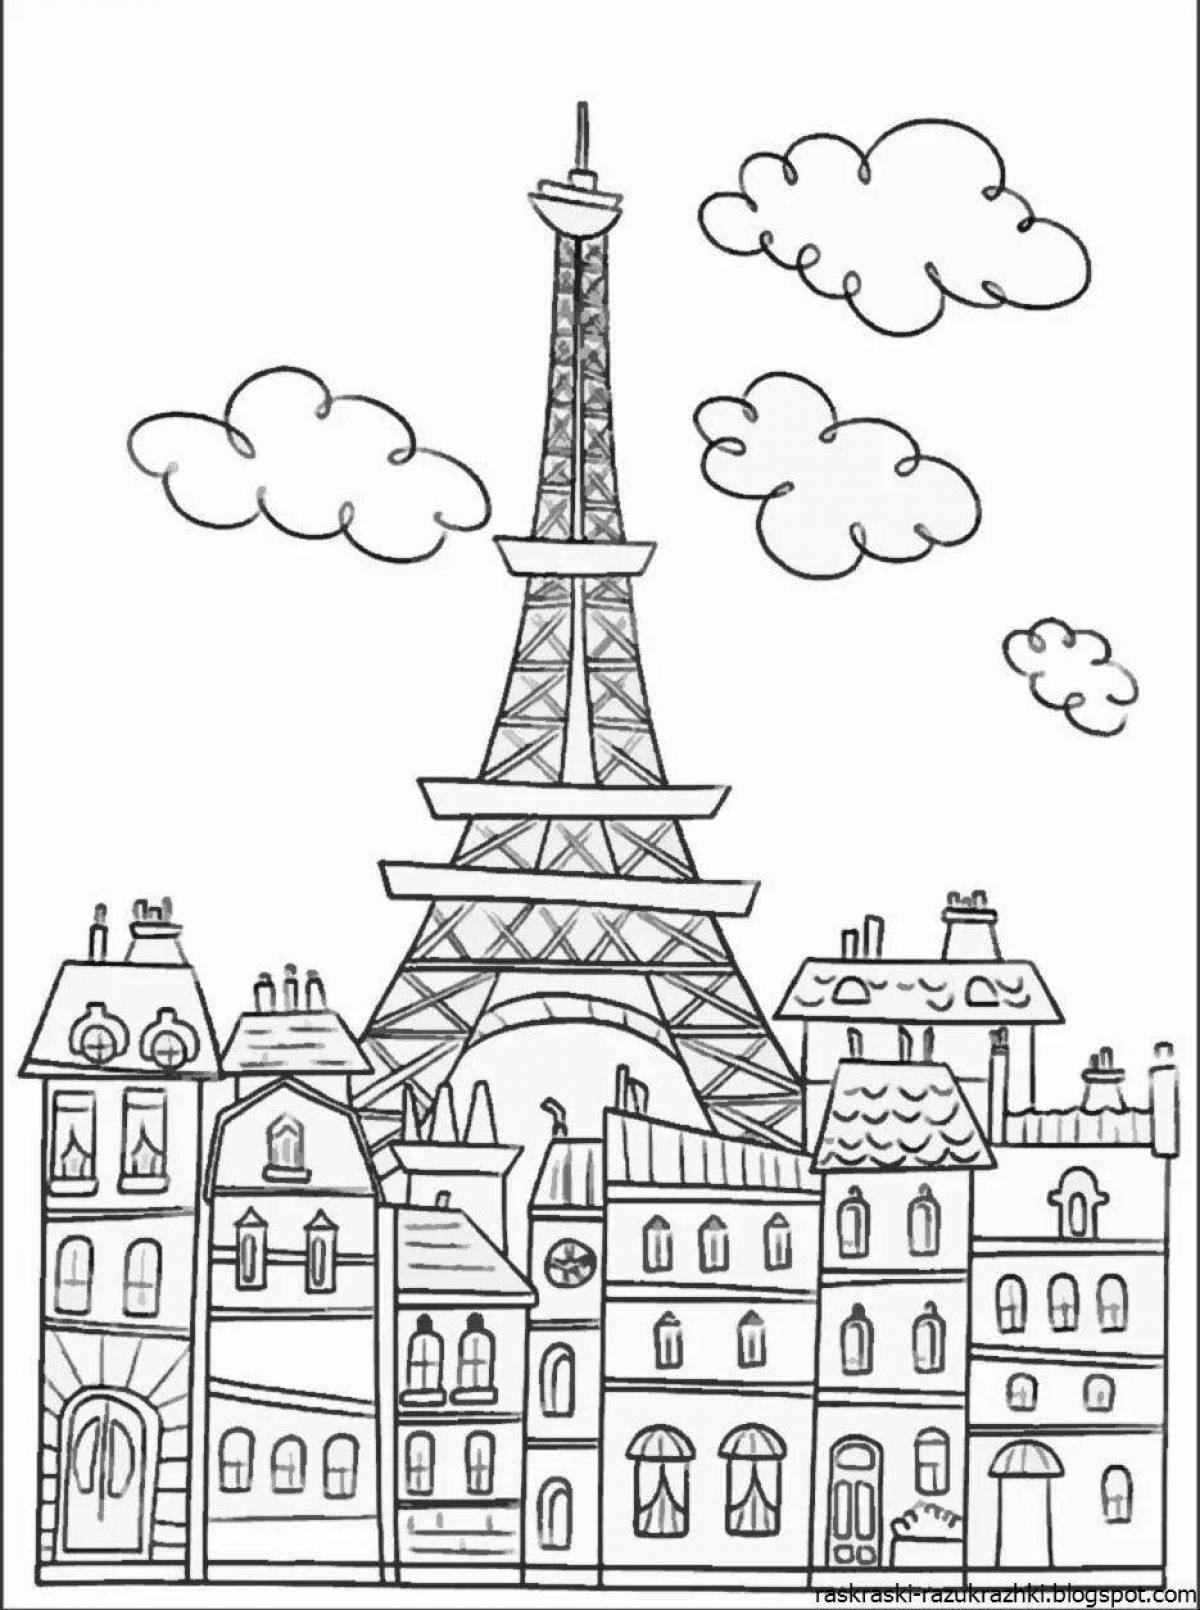 Exquisite city coloring page